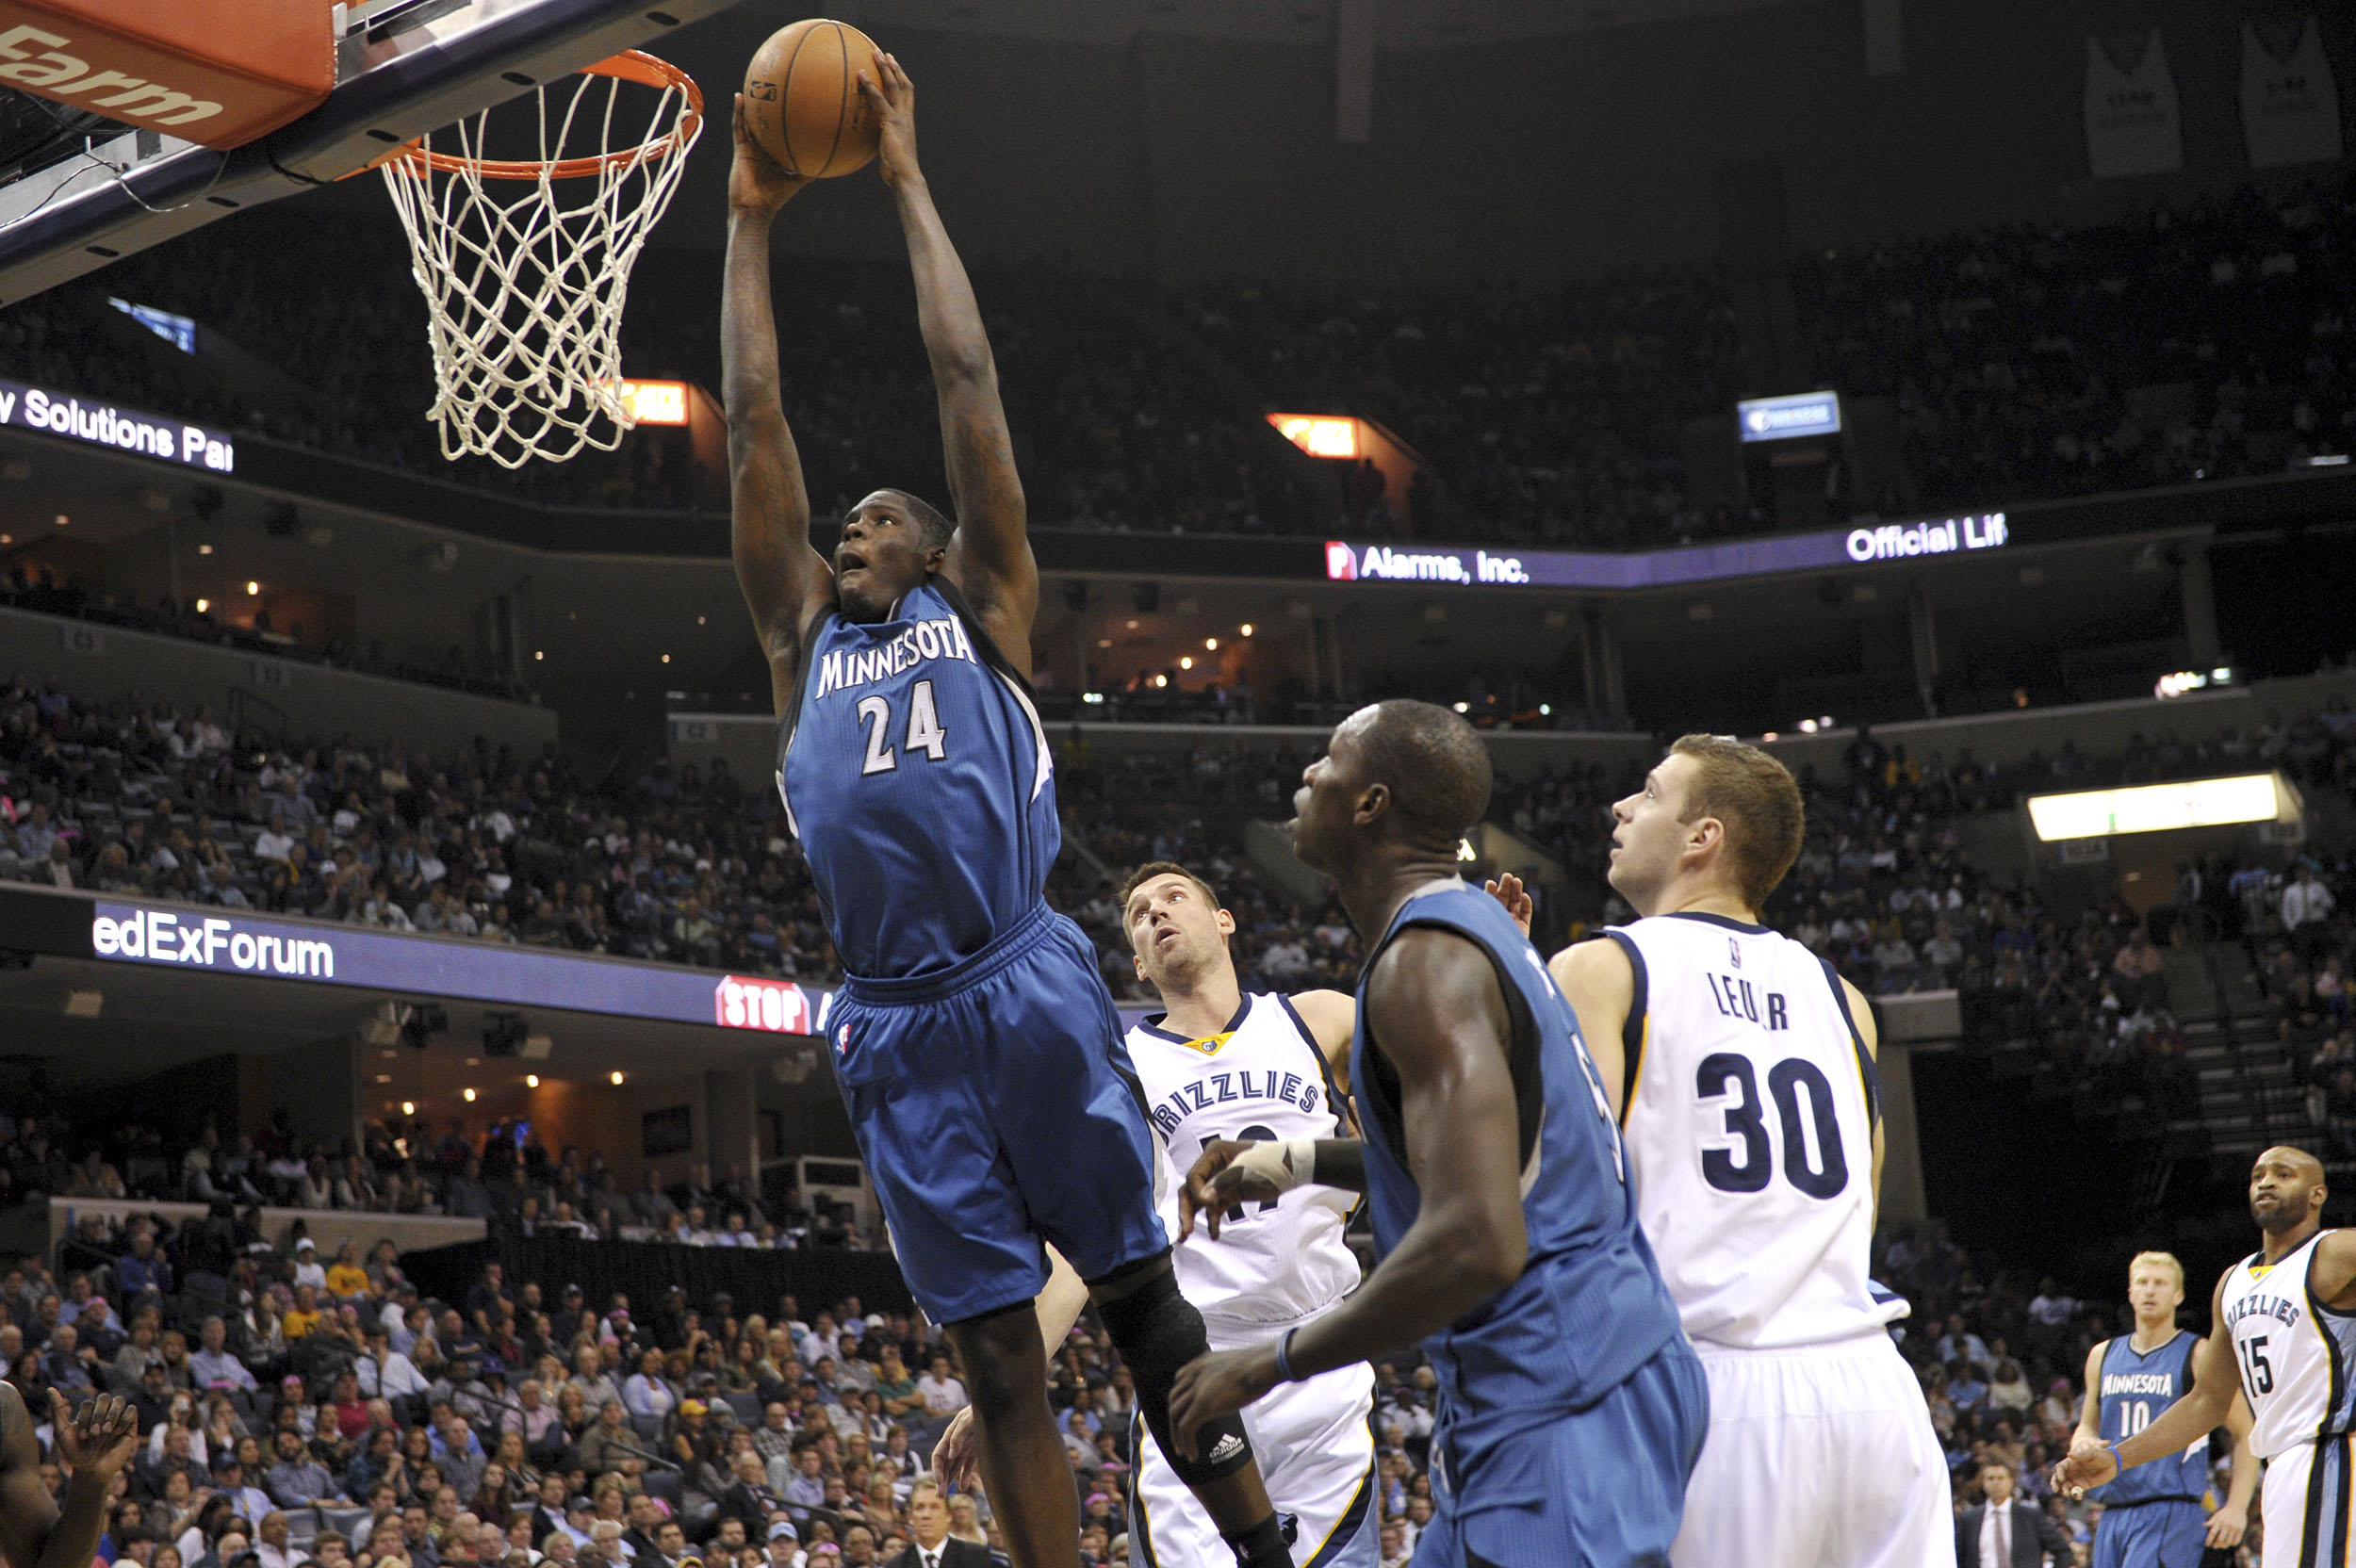 Anthony Bennett can definitely see the rim from this distance. (AP/Brandon Dill)